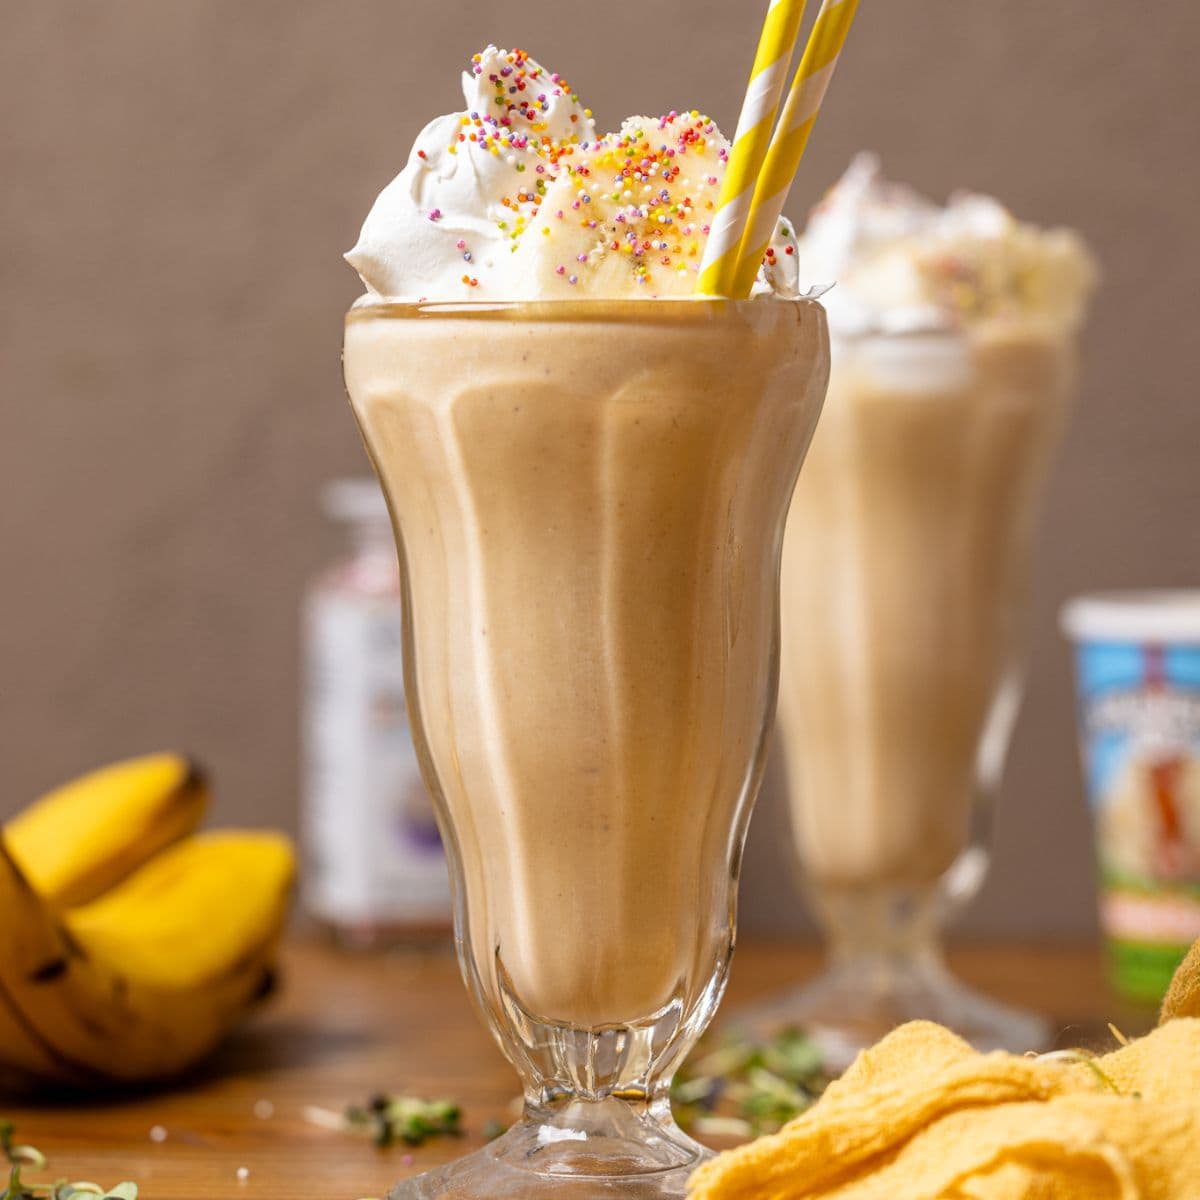 Two glasses filled with milkshake, toppings, bananas, and a yellow napkin.